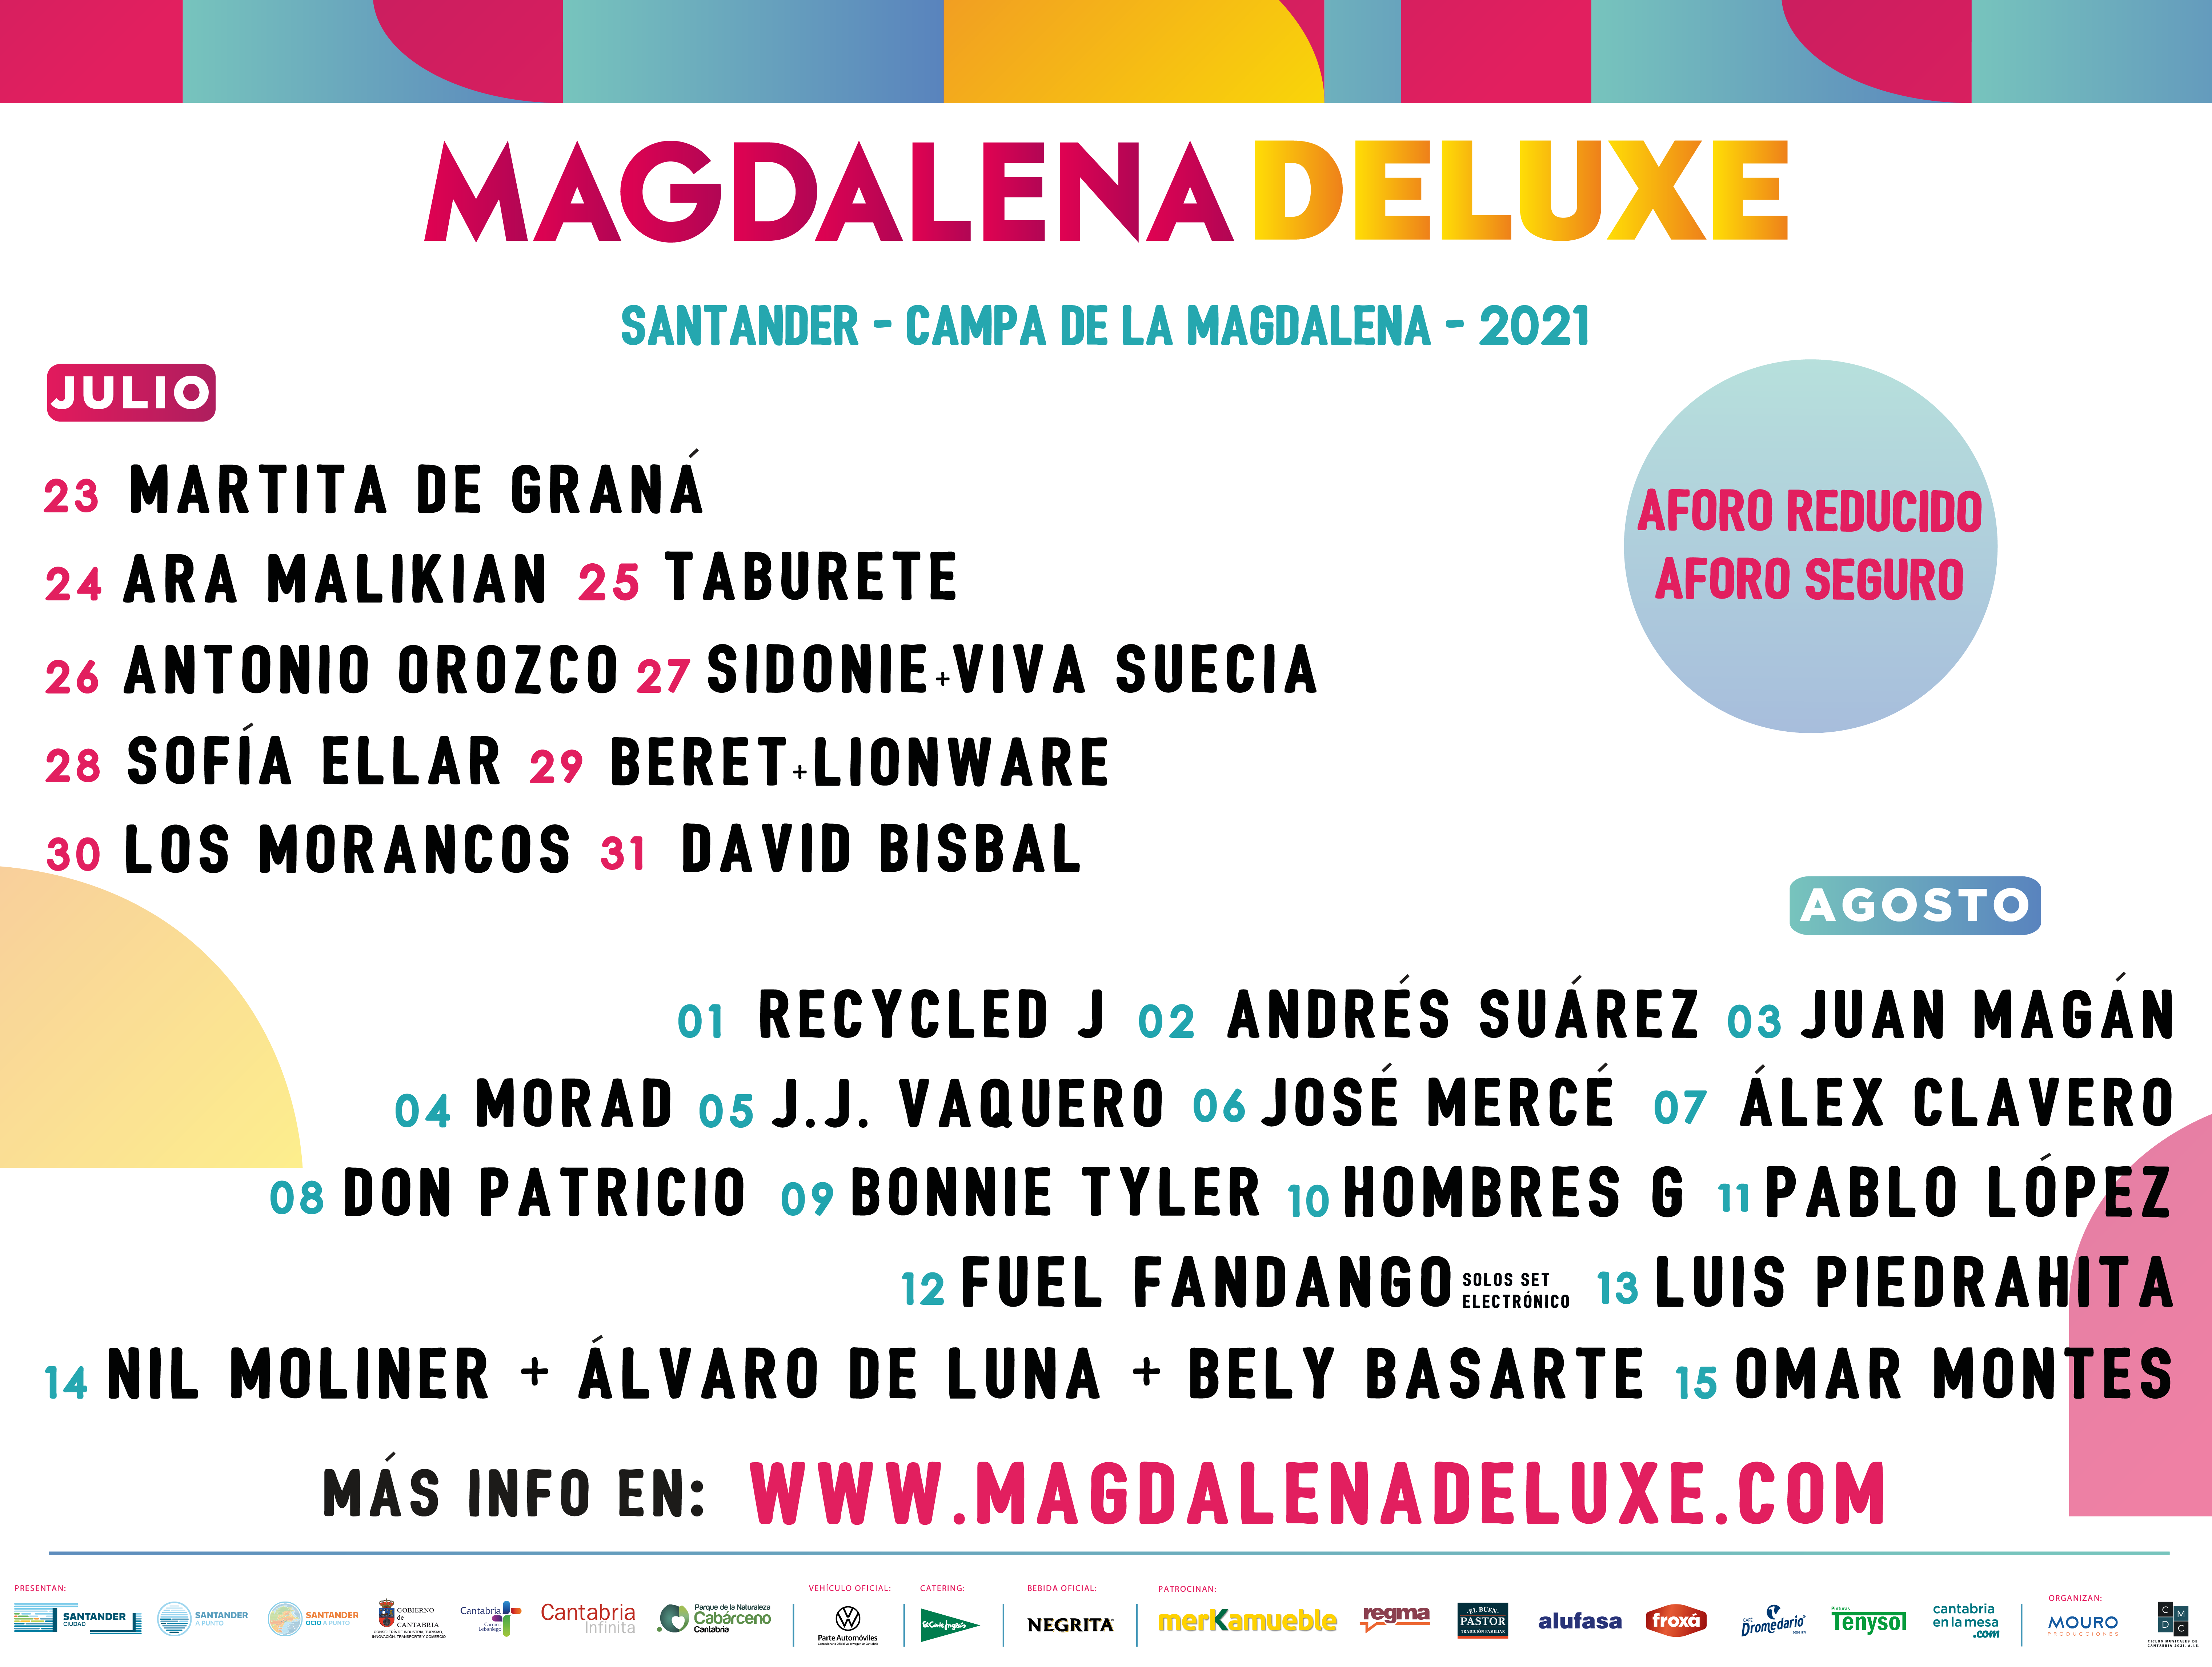 bonnie-tyler-magdalena-deluxe-9-agosto-60d9aaf9bb3f06.57480545.png